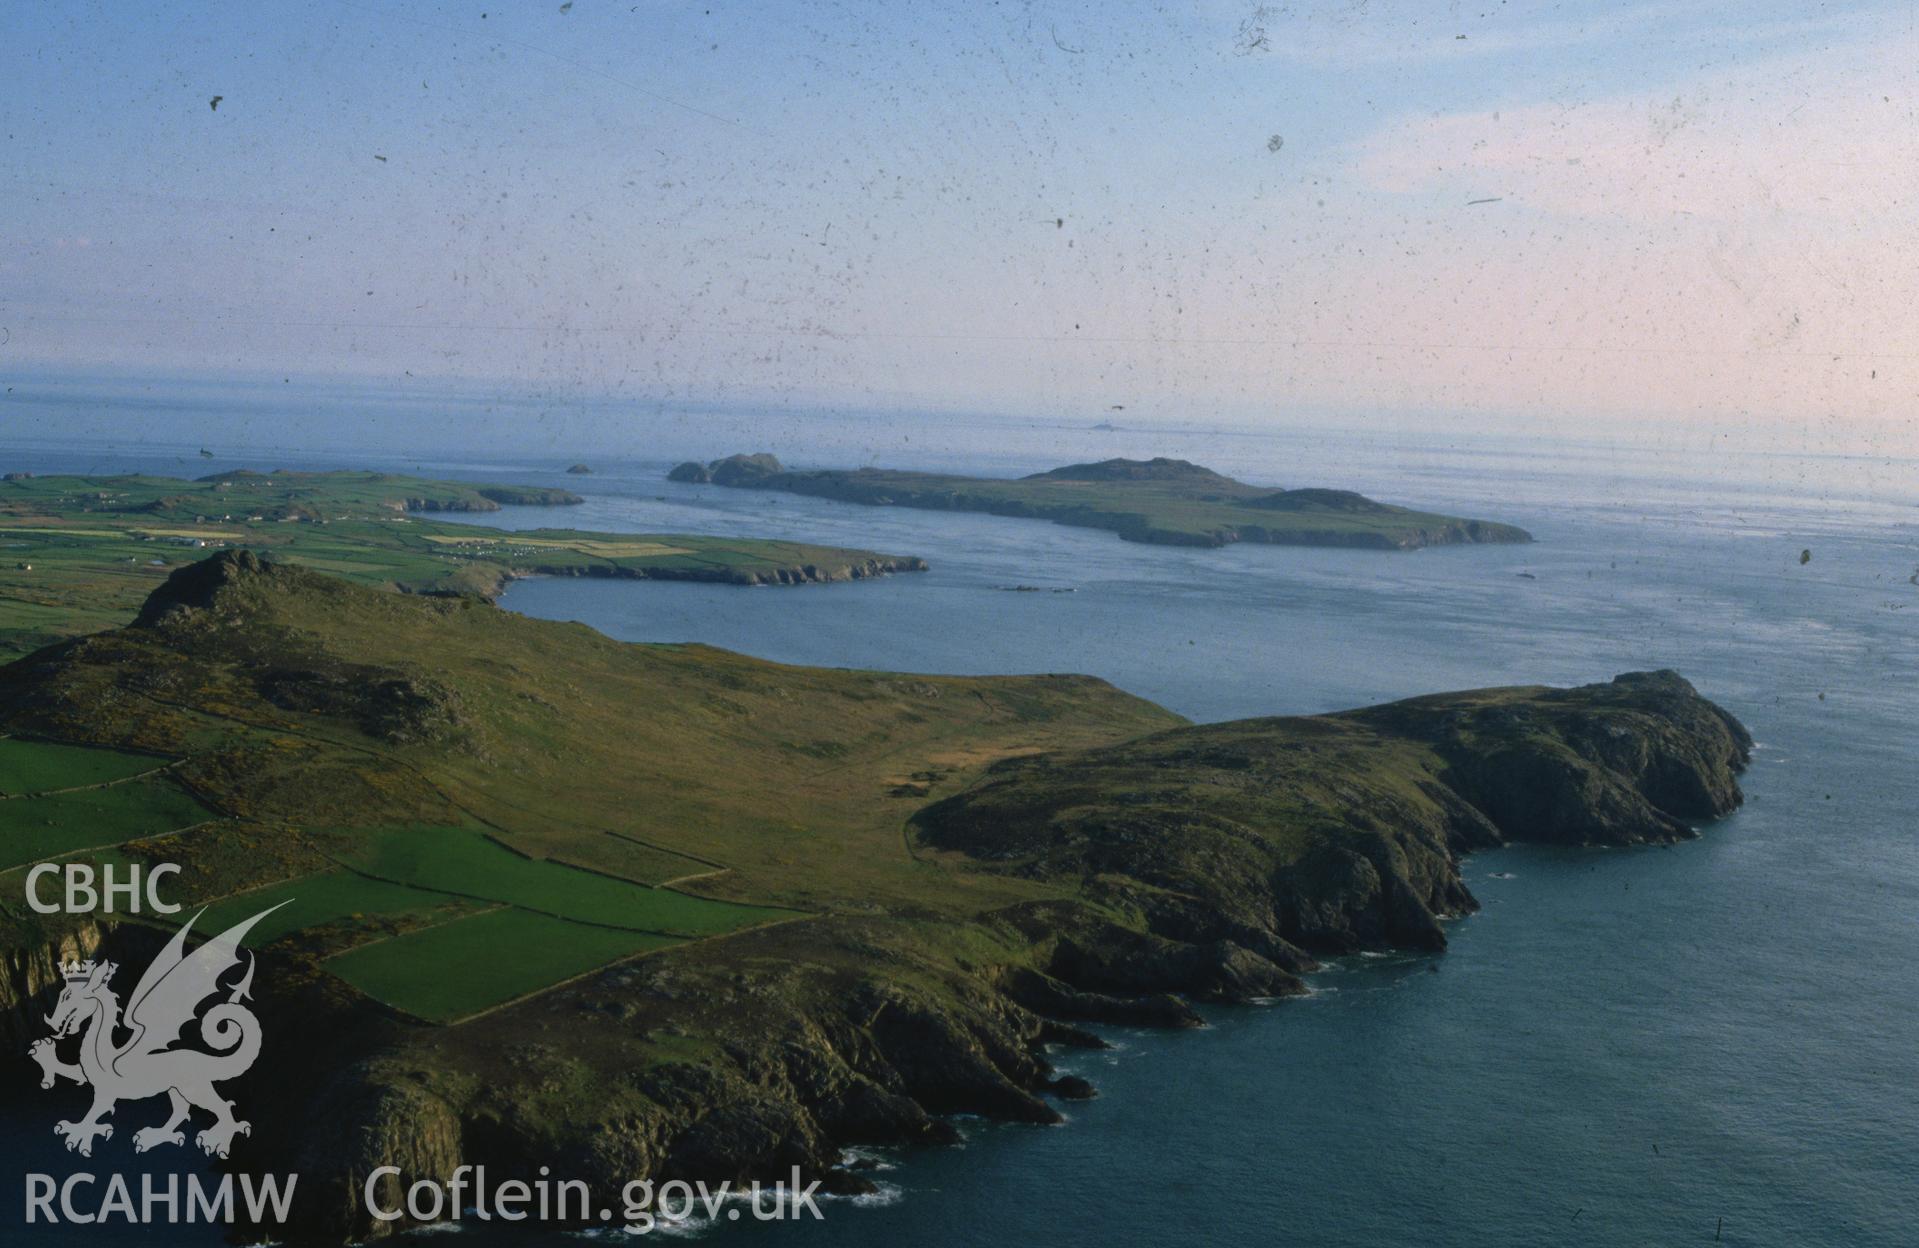 Slide of RCAHMW colour oblique aerial photograph of St David's Head And Ramsey Island, taken by C.R. Musson, 18/5/1989.